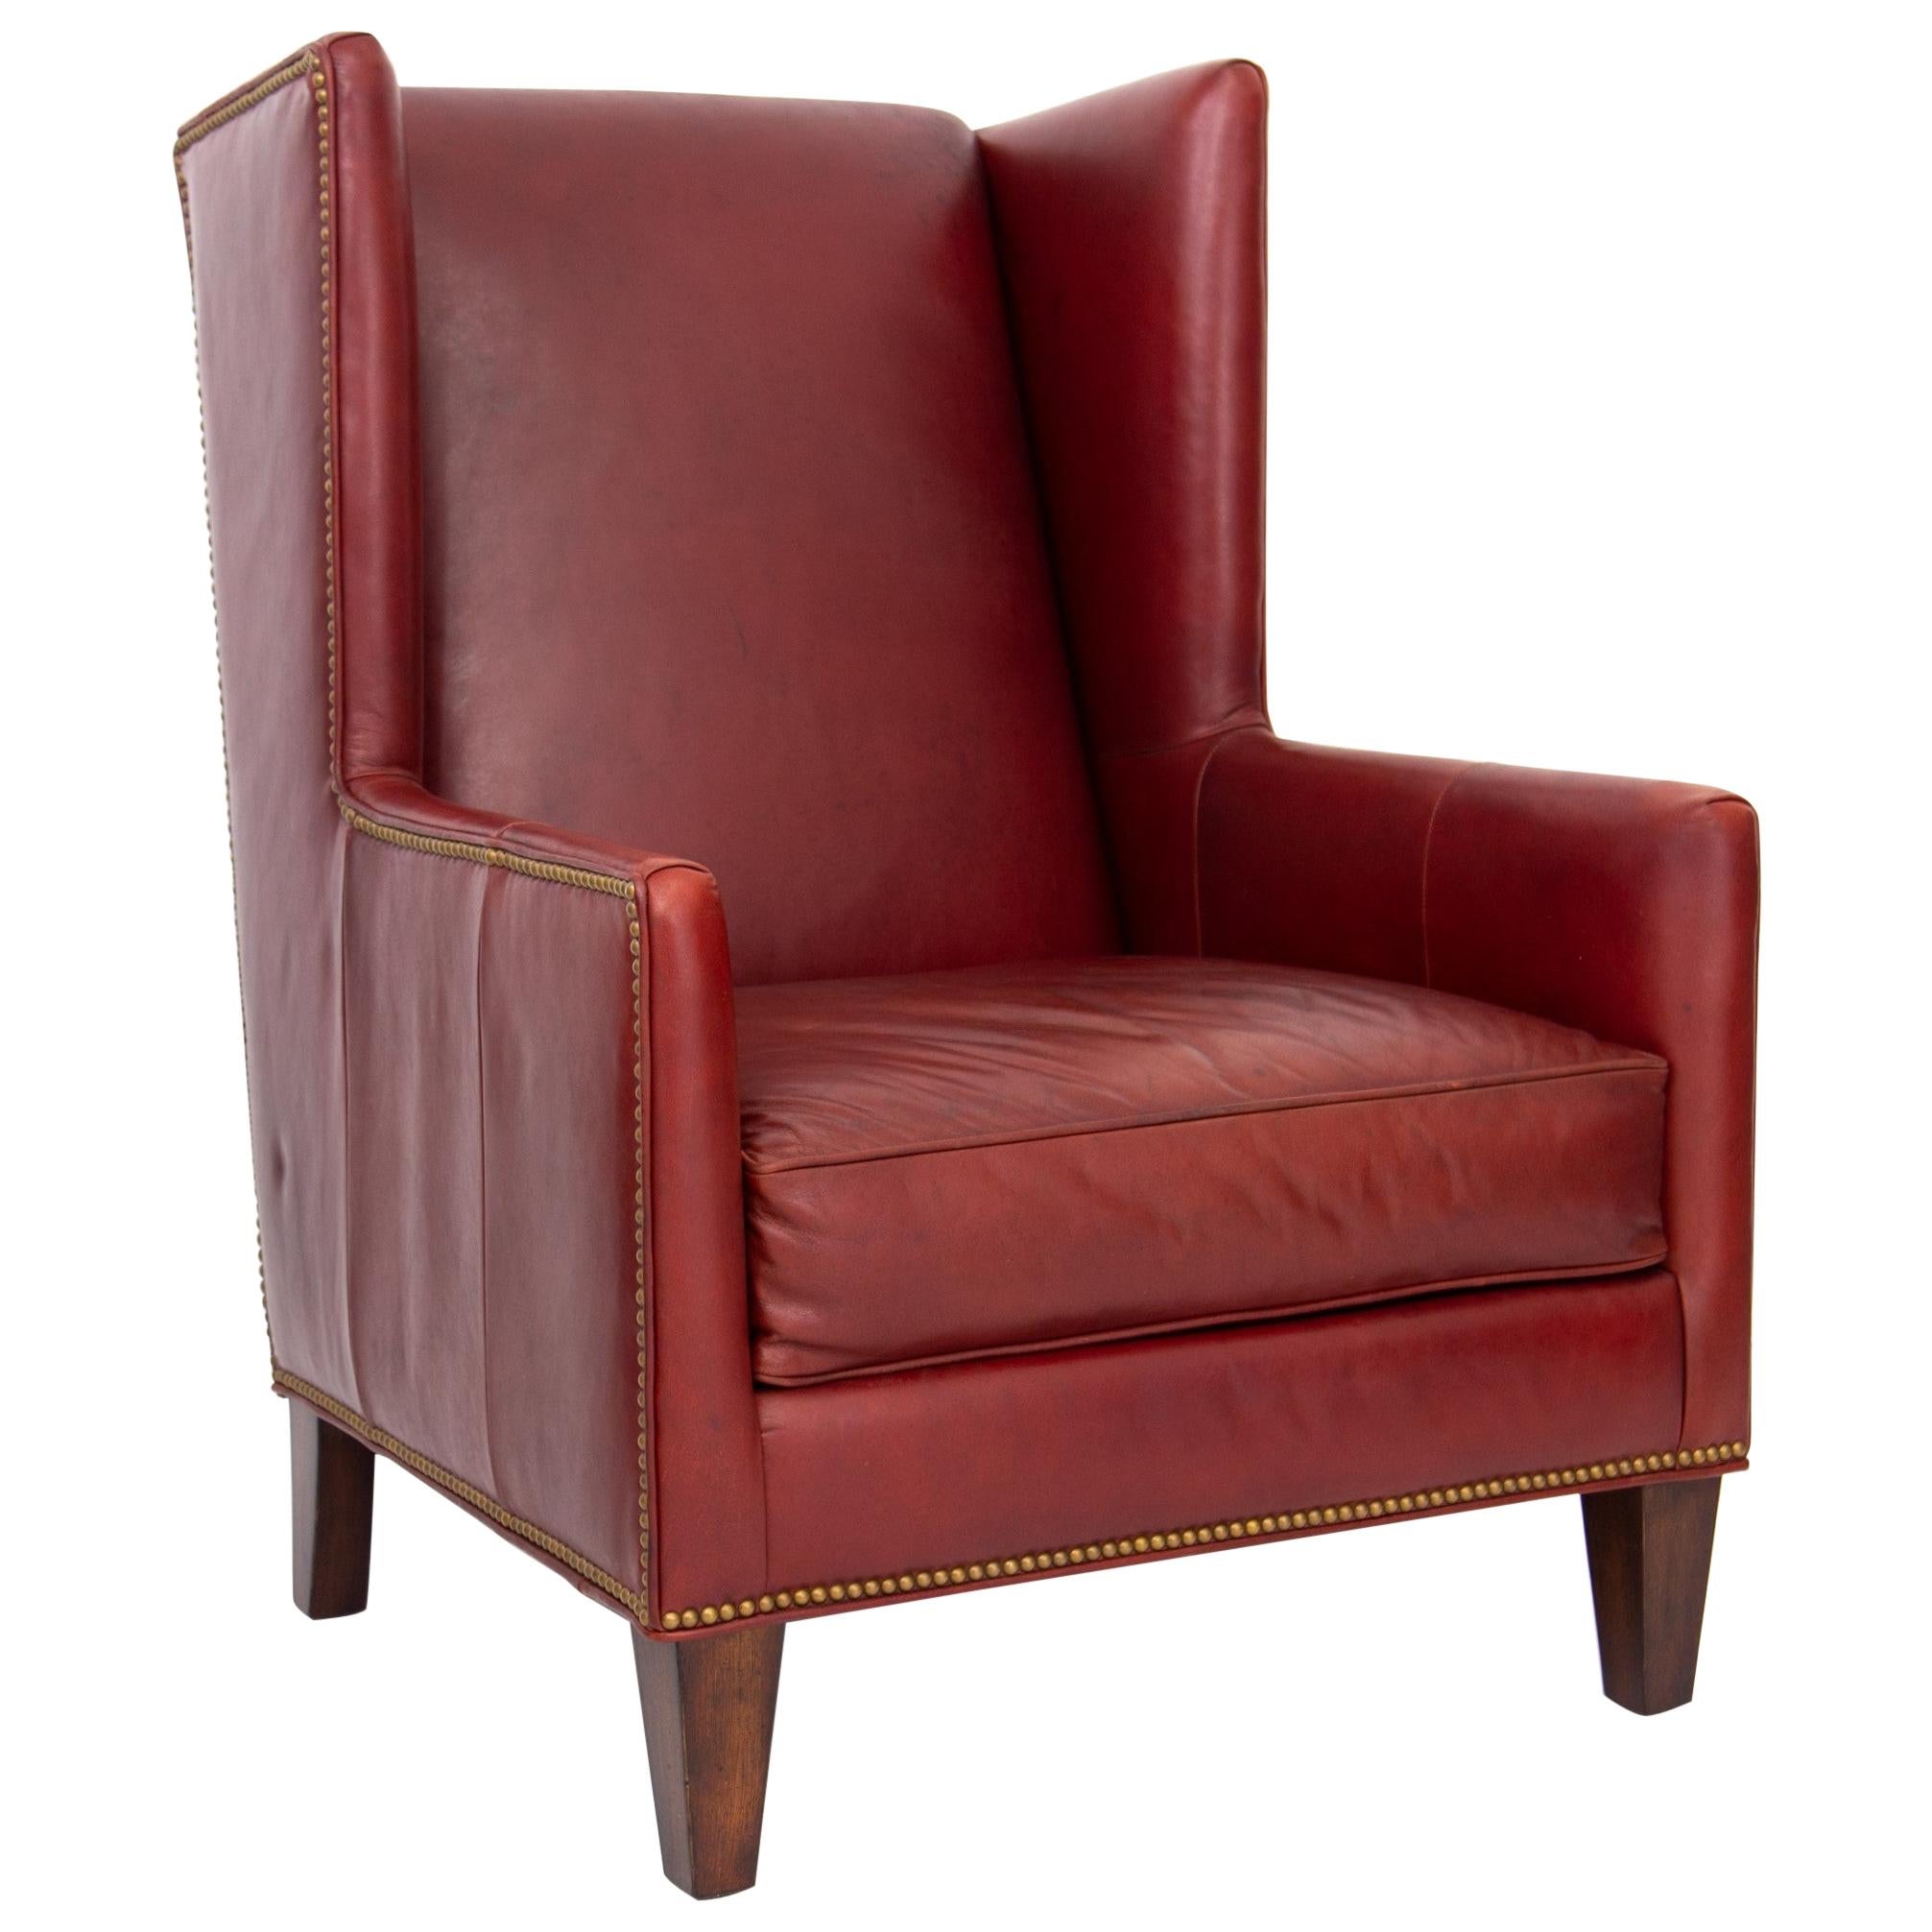 Deep Red Leather Wingback Fireside Chair with Brass Nailhead Trim by Massoud